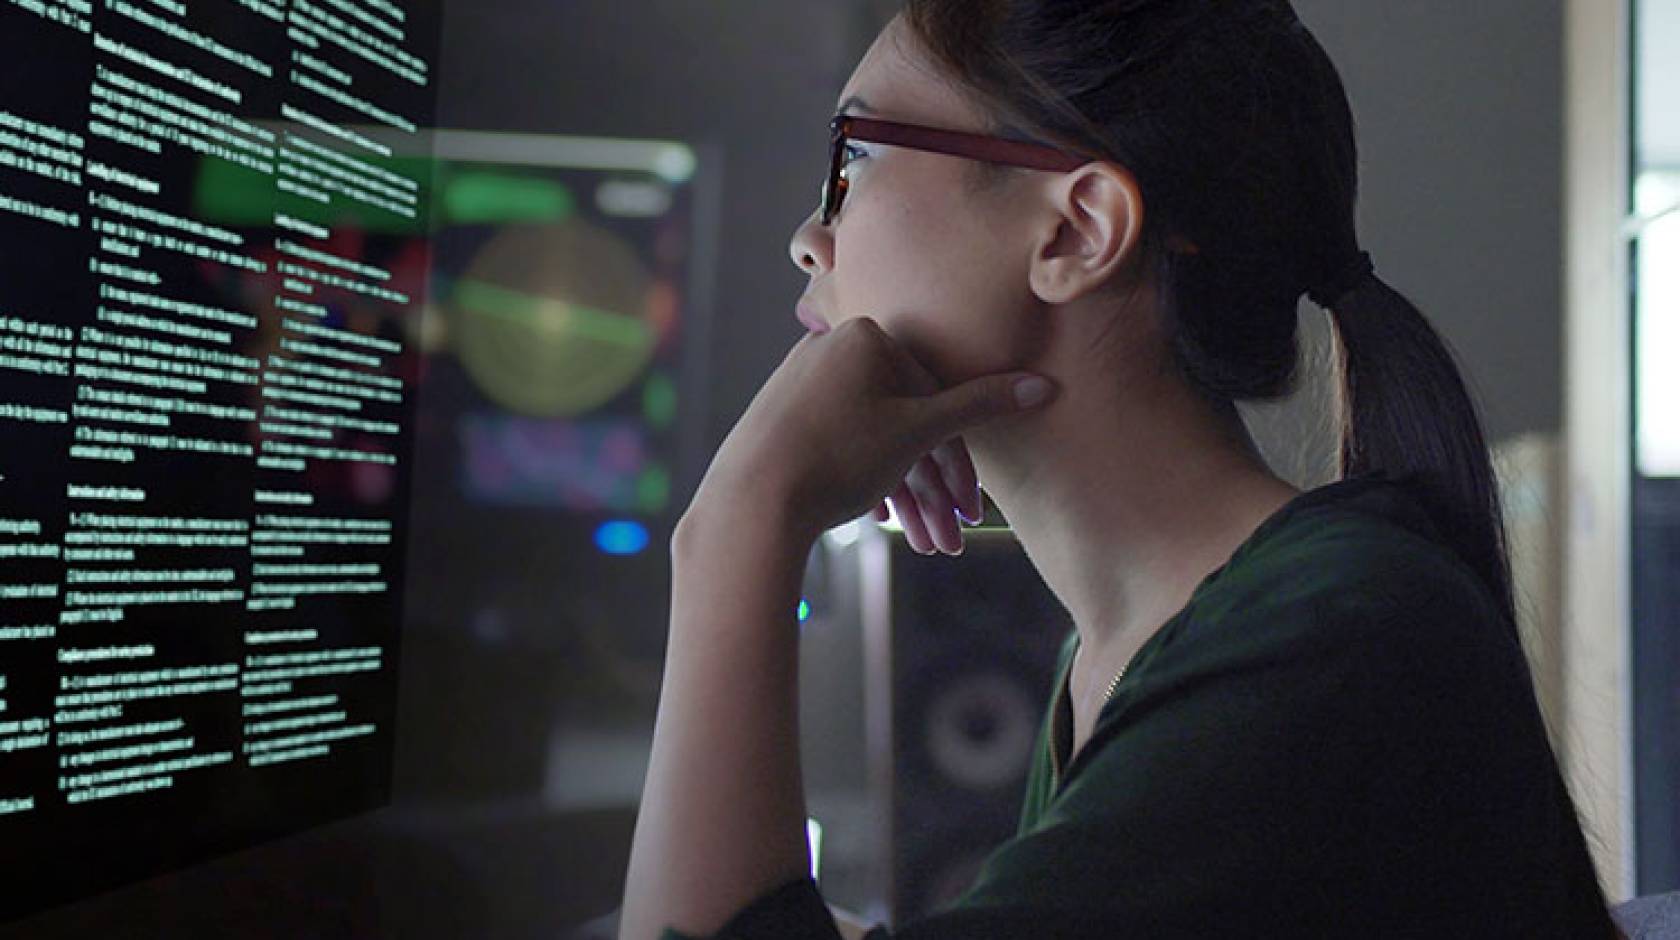 Young Asian woman looking at code on a screen in a dark room